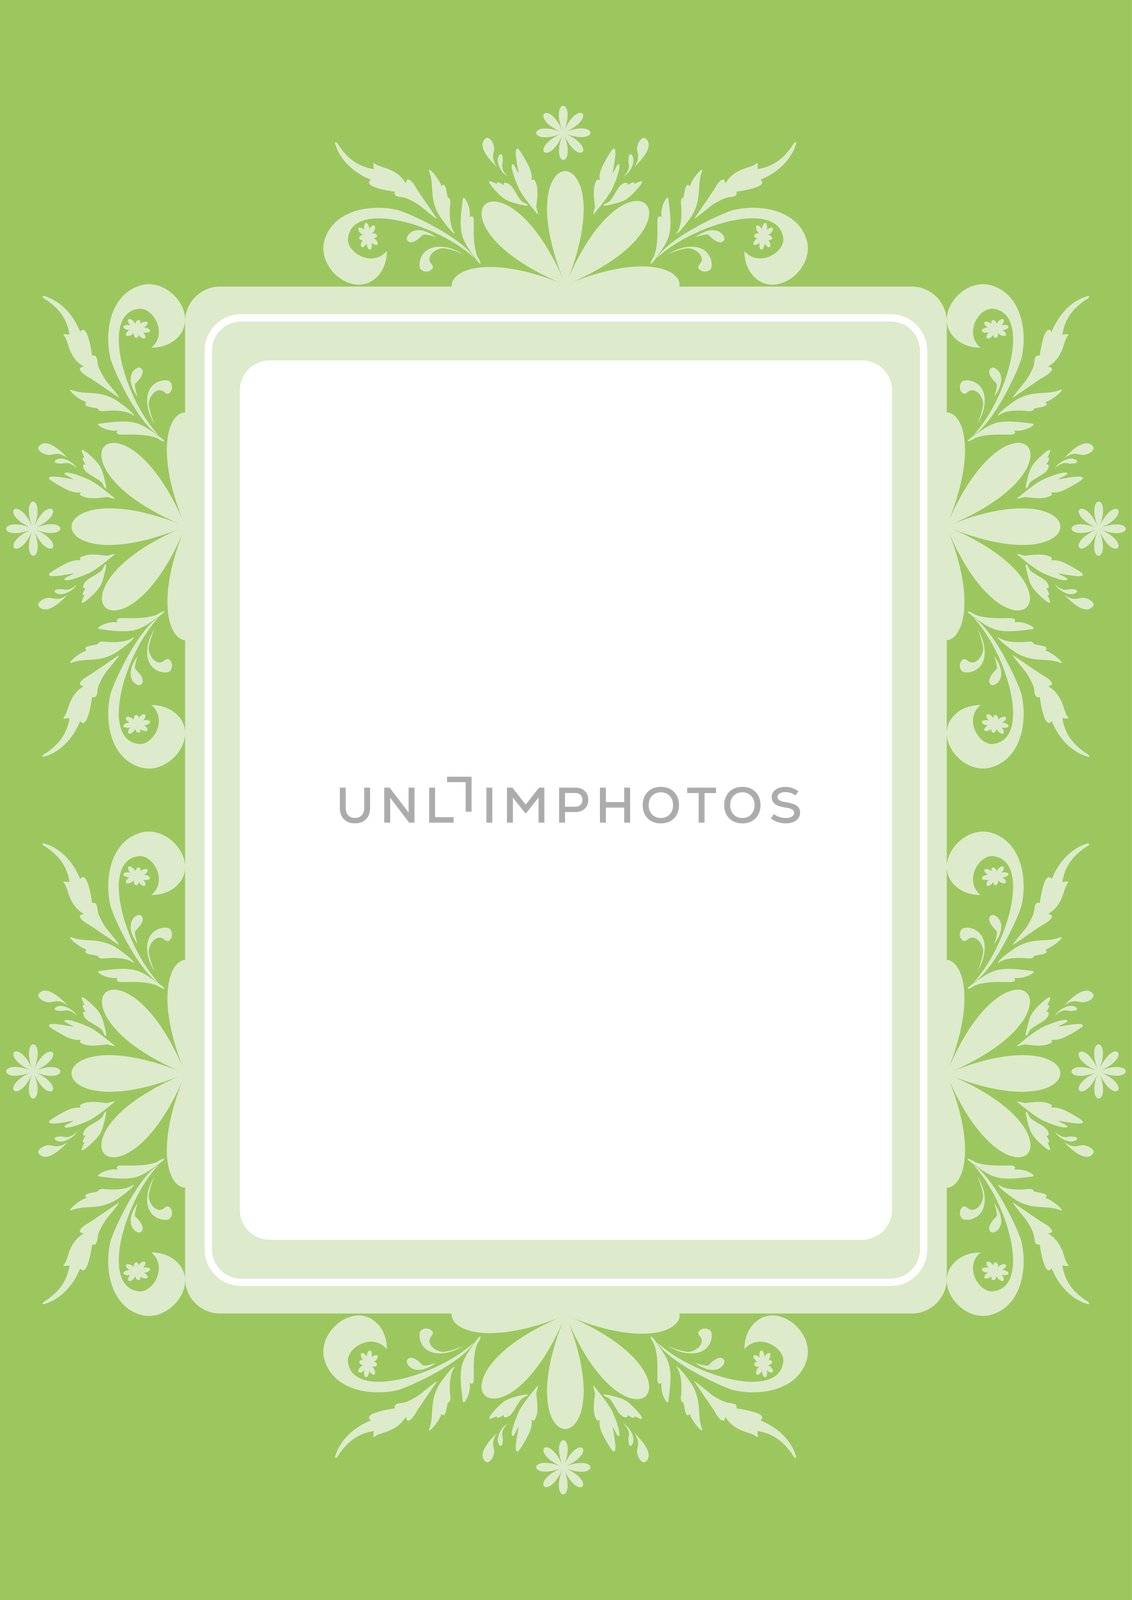 Abstract floral background with flowers silhouettes and frame.